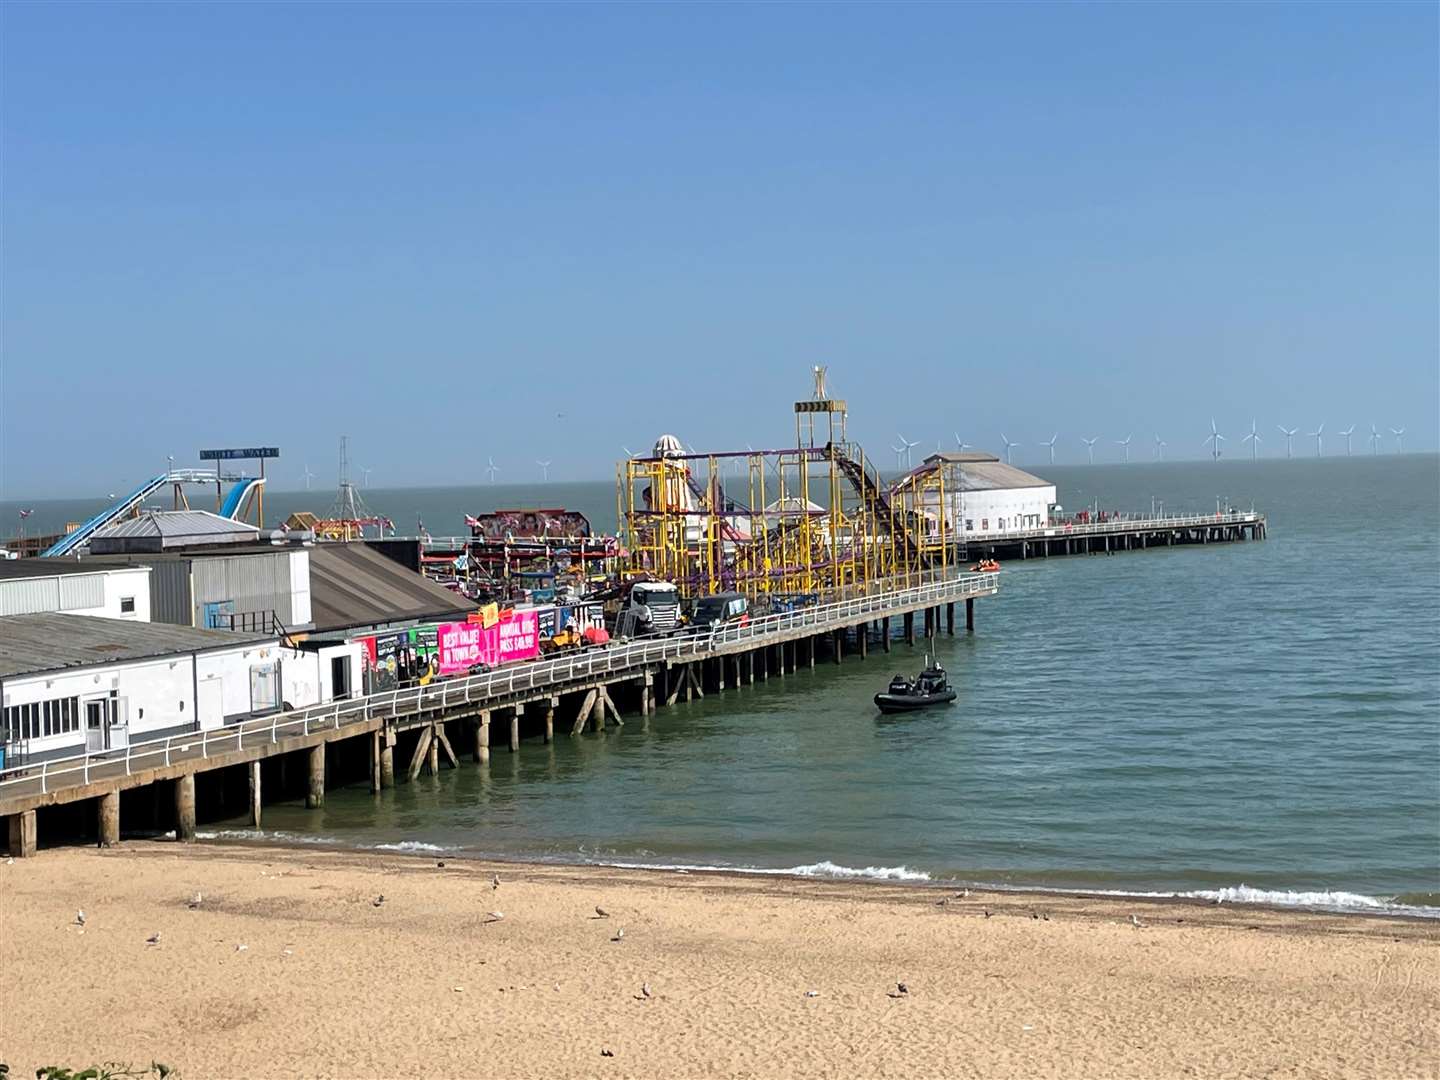 A boat next to Clacton Pier in Clacton-on-Sea (Sam Russell/PA)